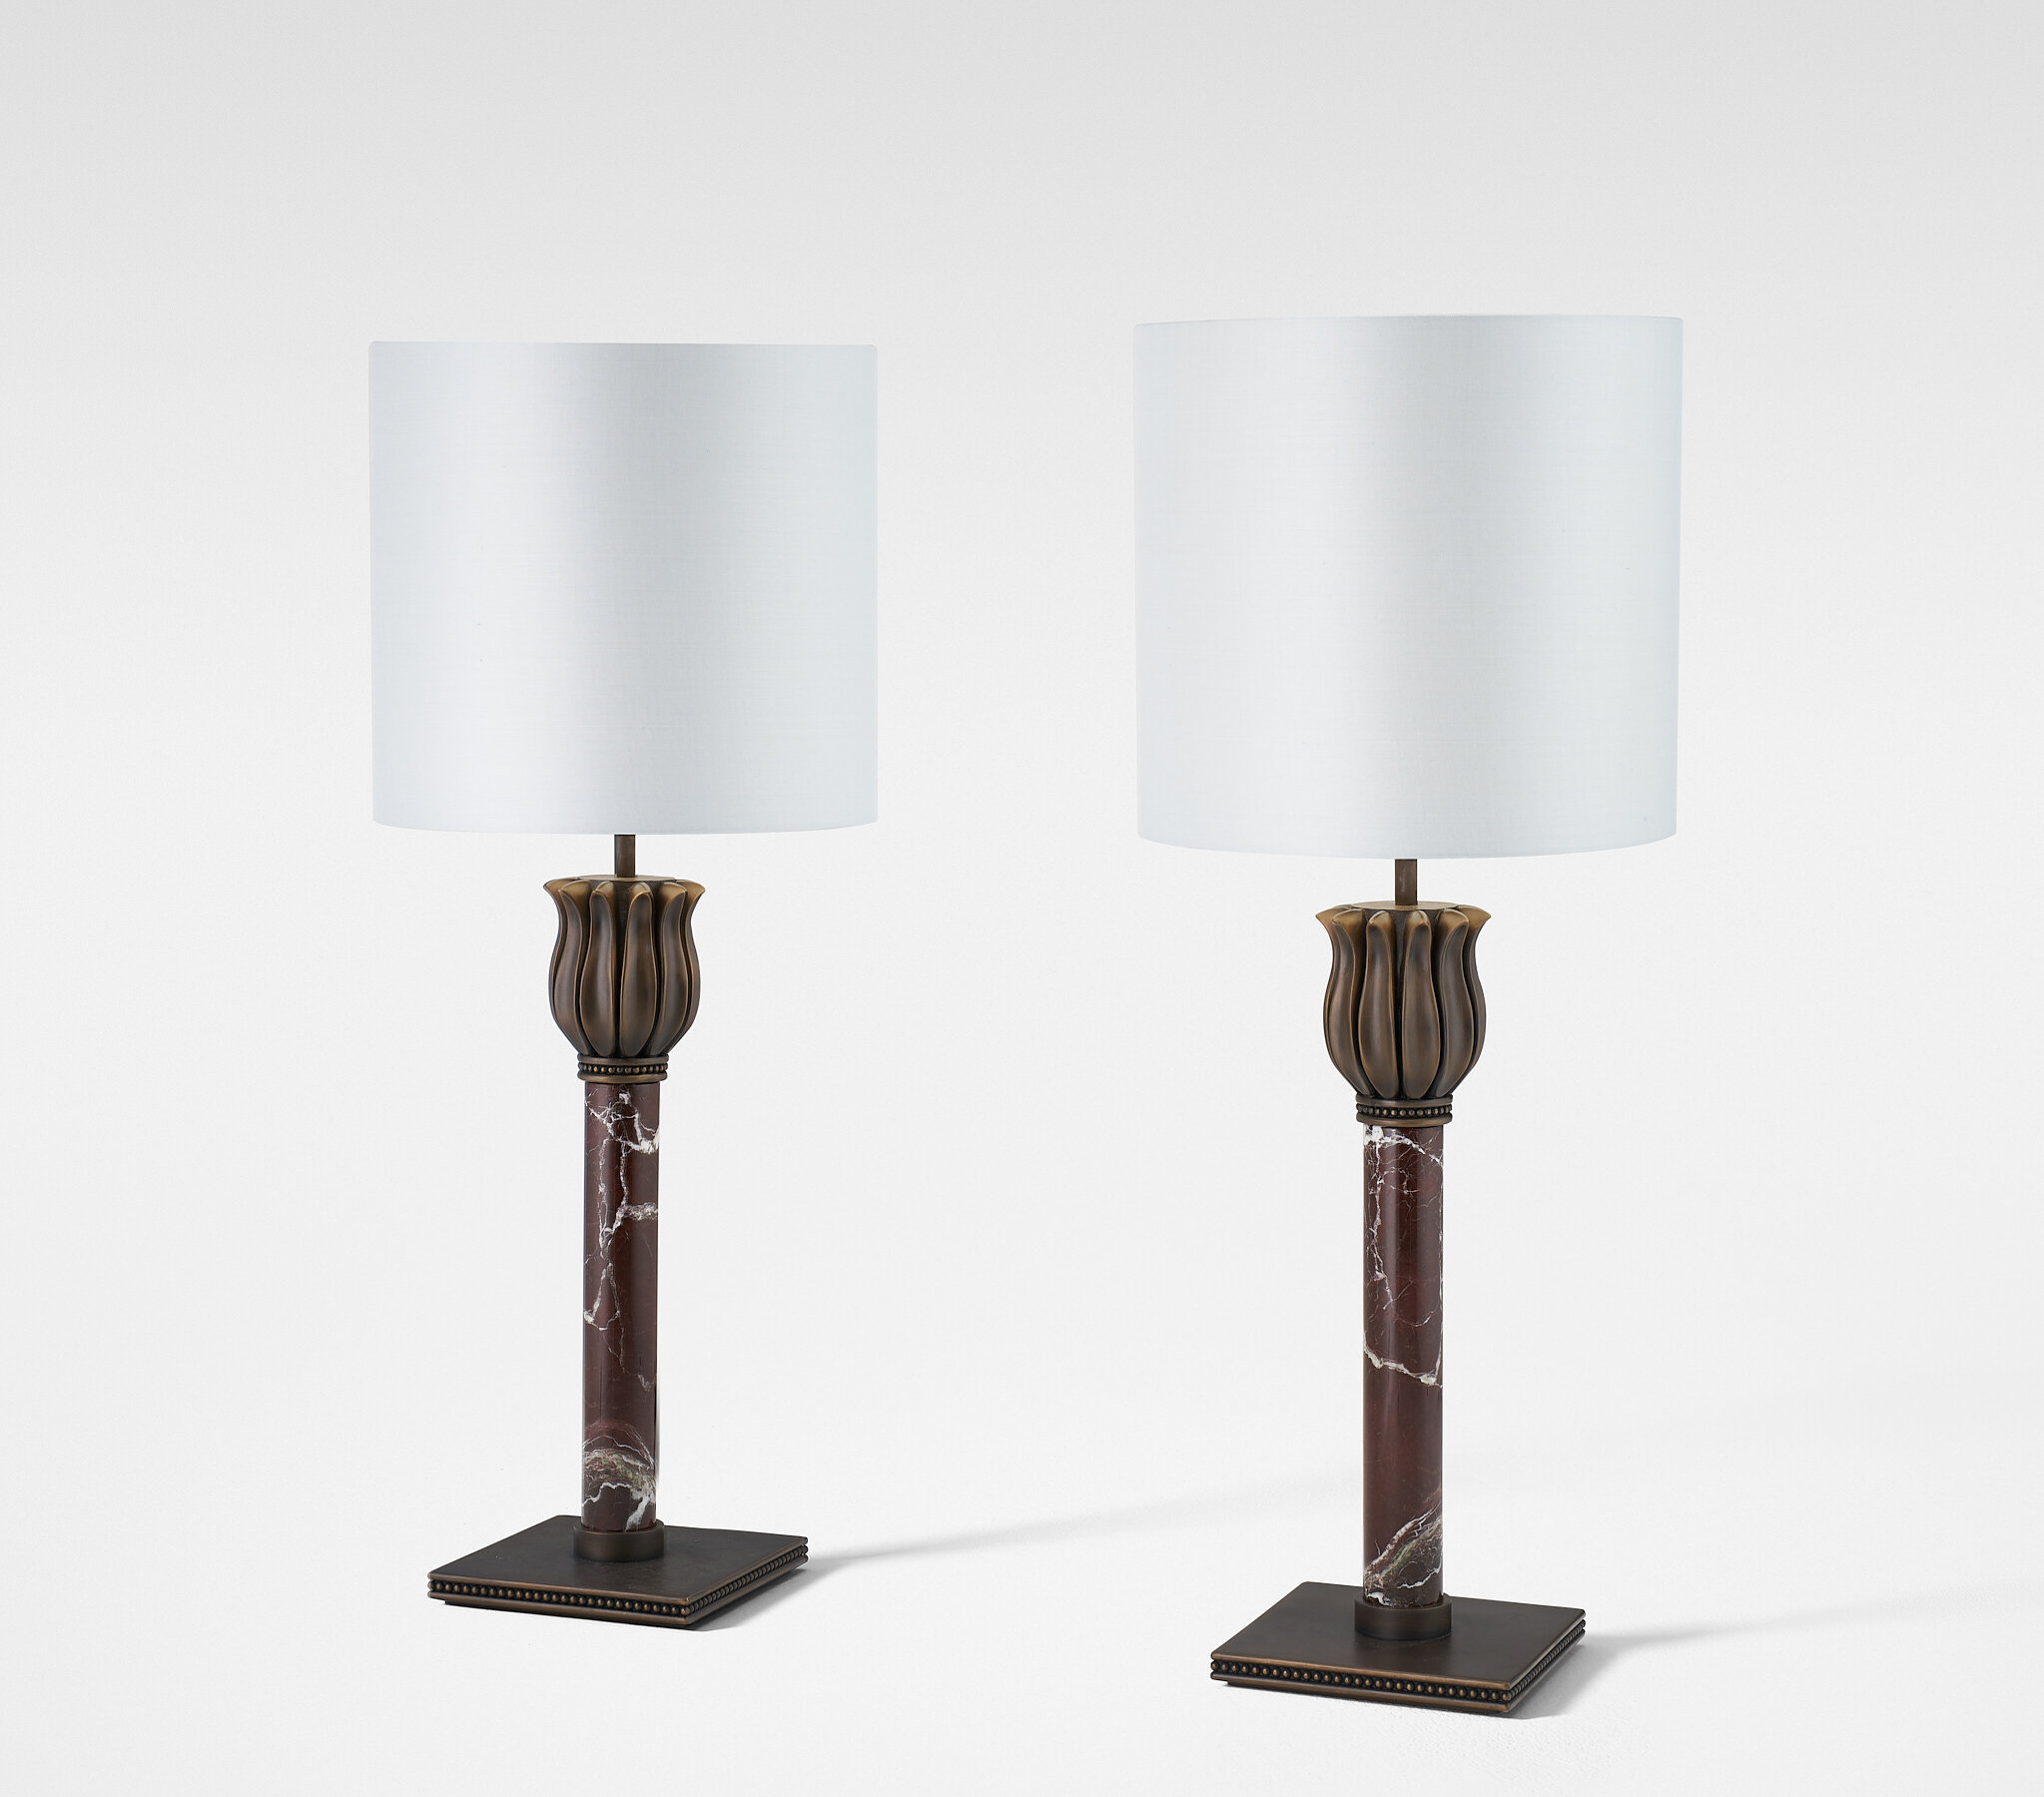 Letitia table lamp VERSION_LOW RES (3000px sRGB).jpg